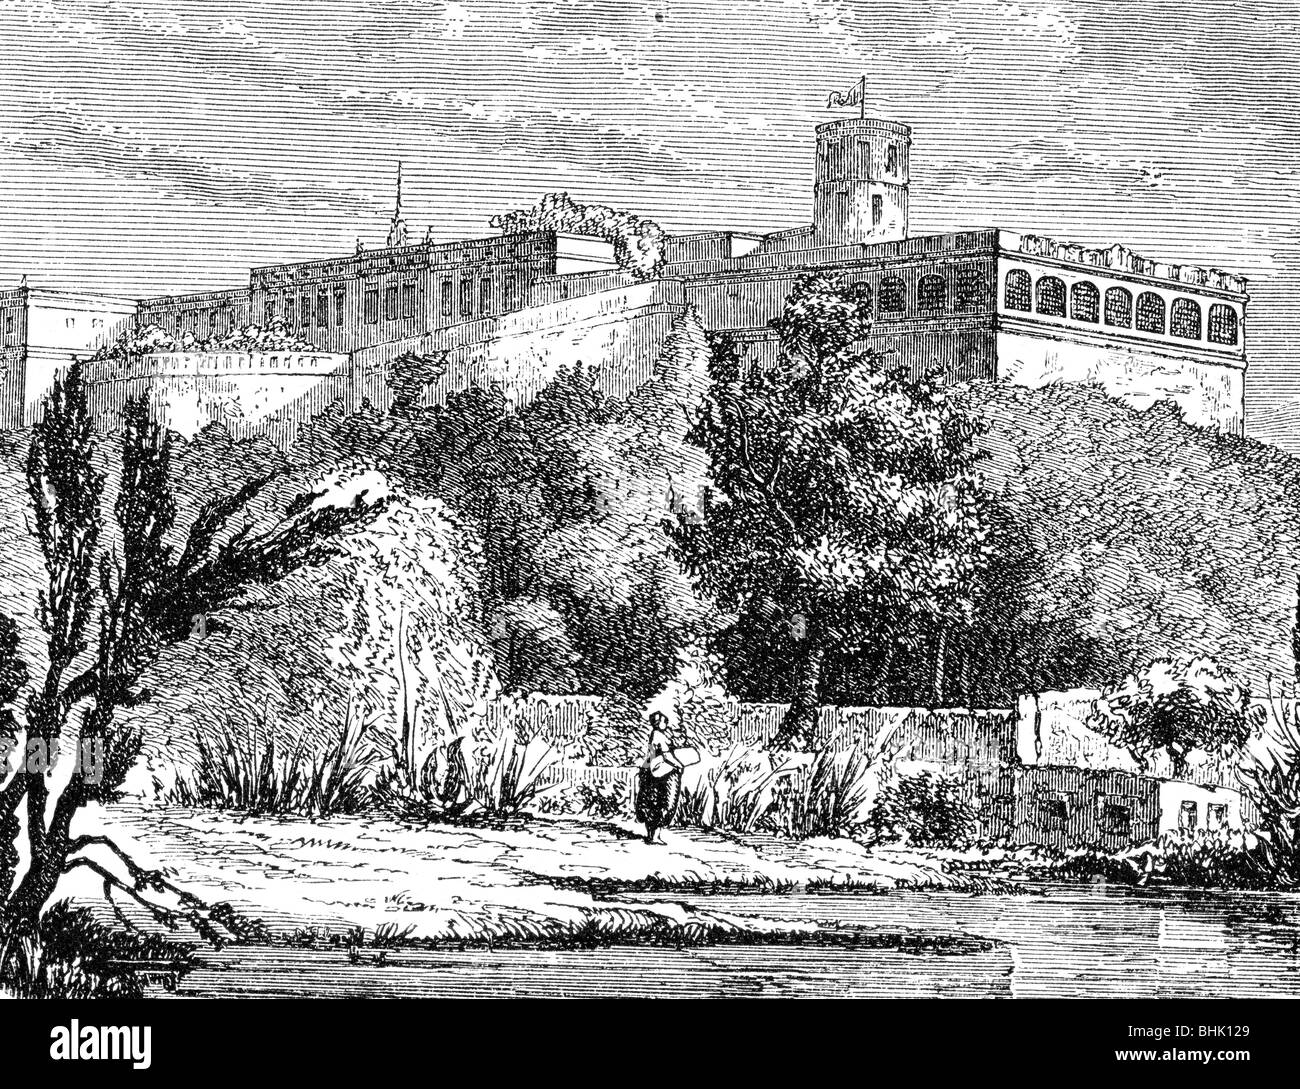 geography / travel, Mexico, Mexico City, castles, Chapultepec Castle, built: 1864, exterior view, wood engraving, circa 1900, historic, historical, Central America, residence of emperor Maximilian I of Mexico, palace, Mexican Empire, balcony, building, buildings, architecture, CEAM, 20th century, 1900s, Stock Photo